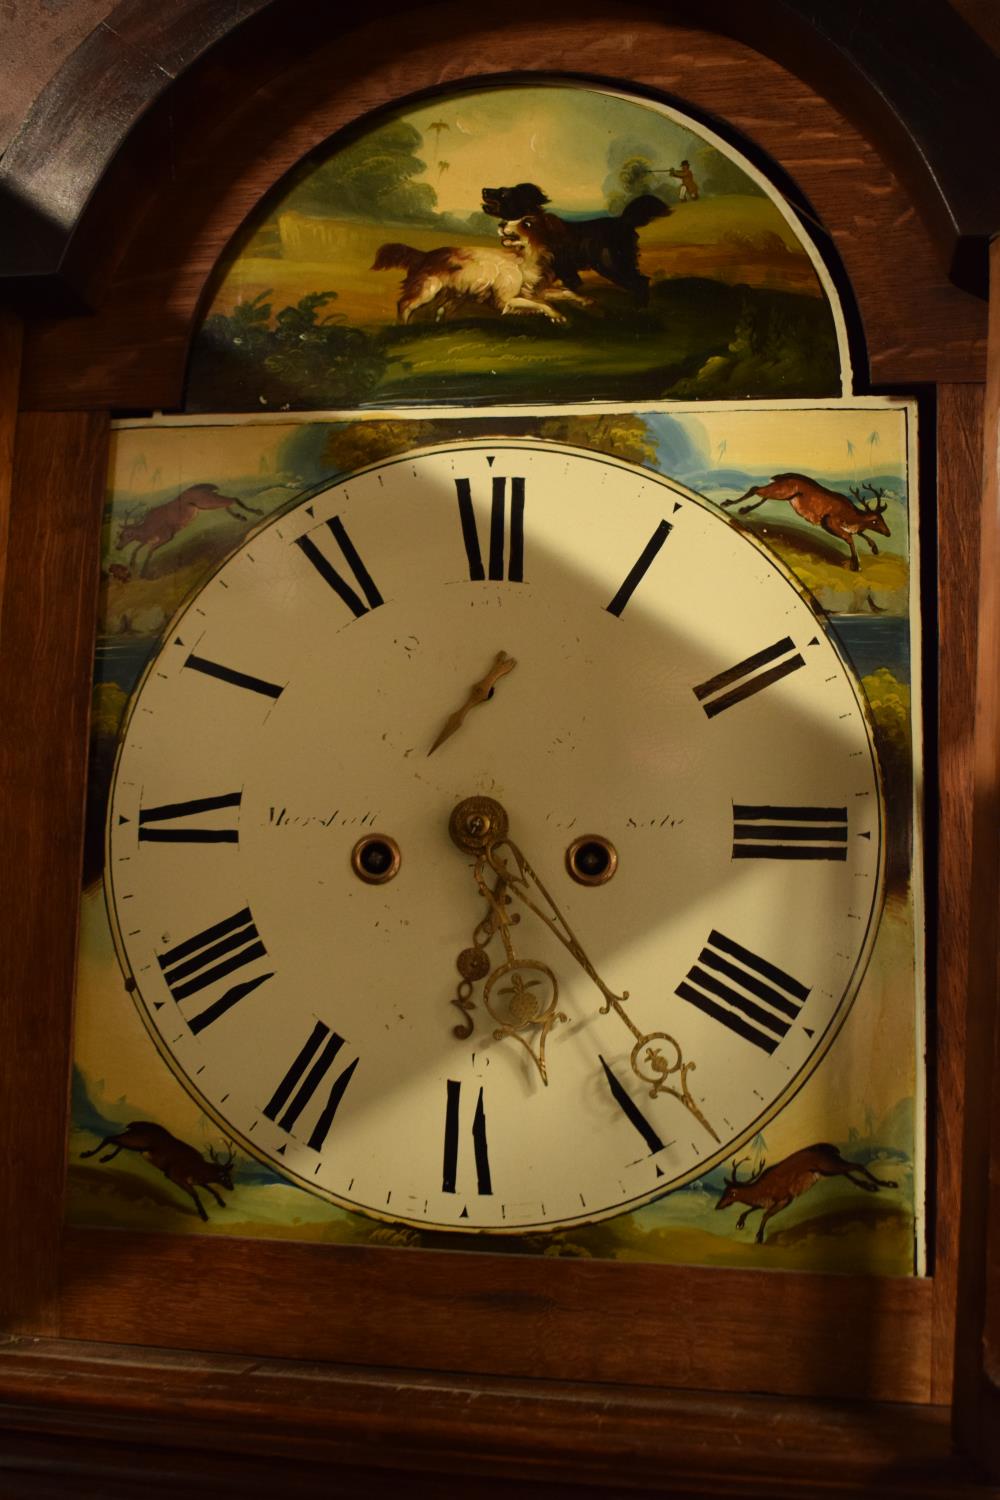 Victorian Grandfather clock, possibly from Sale, Manchester with hunting scenes - Image 3 of 6